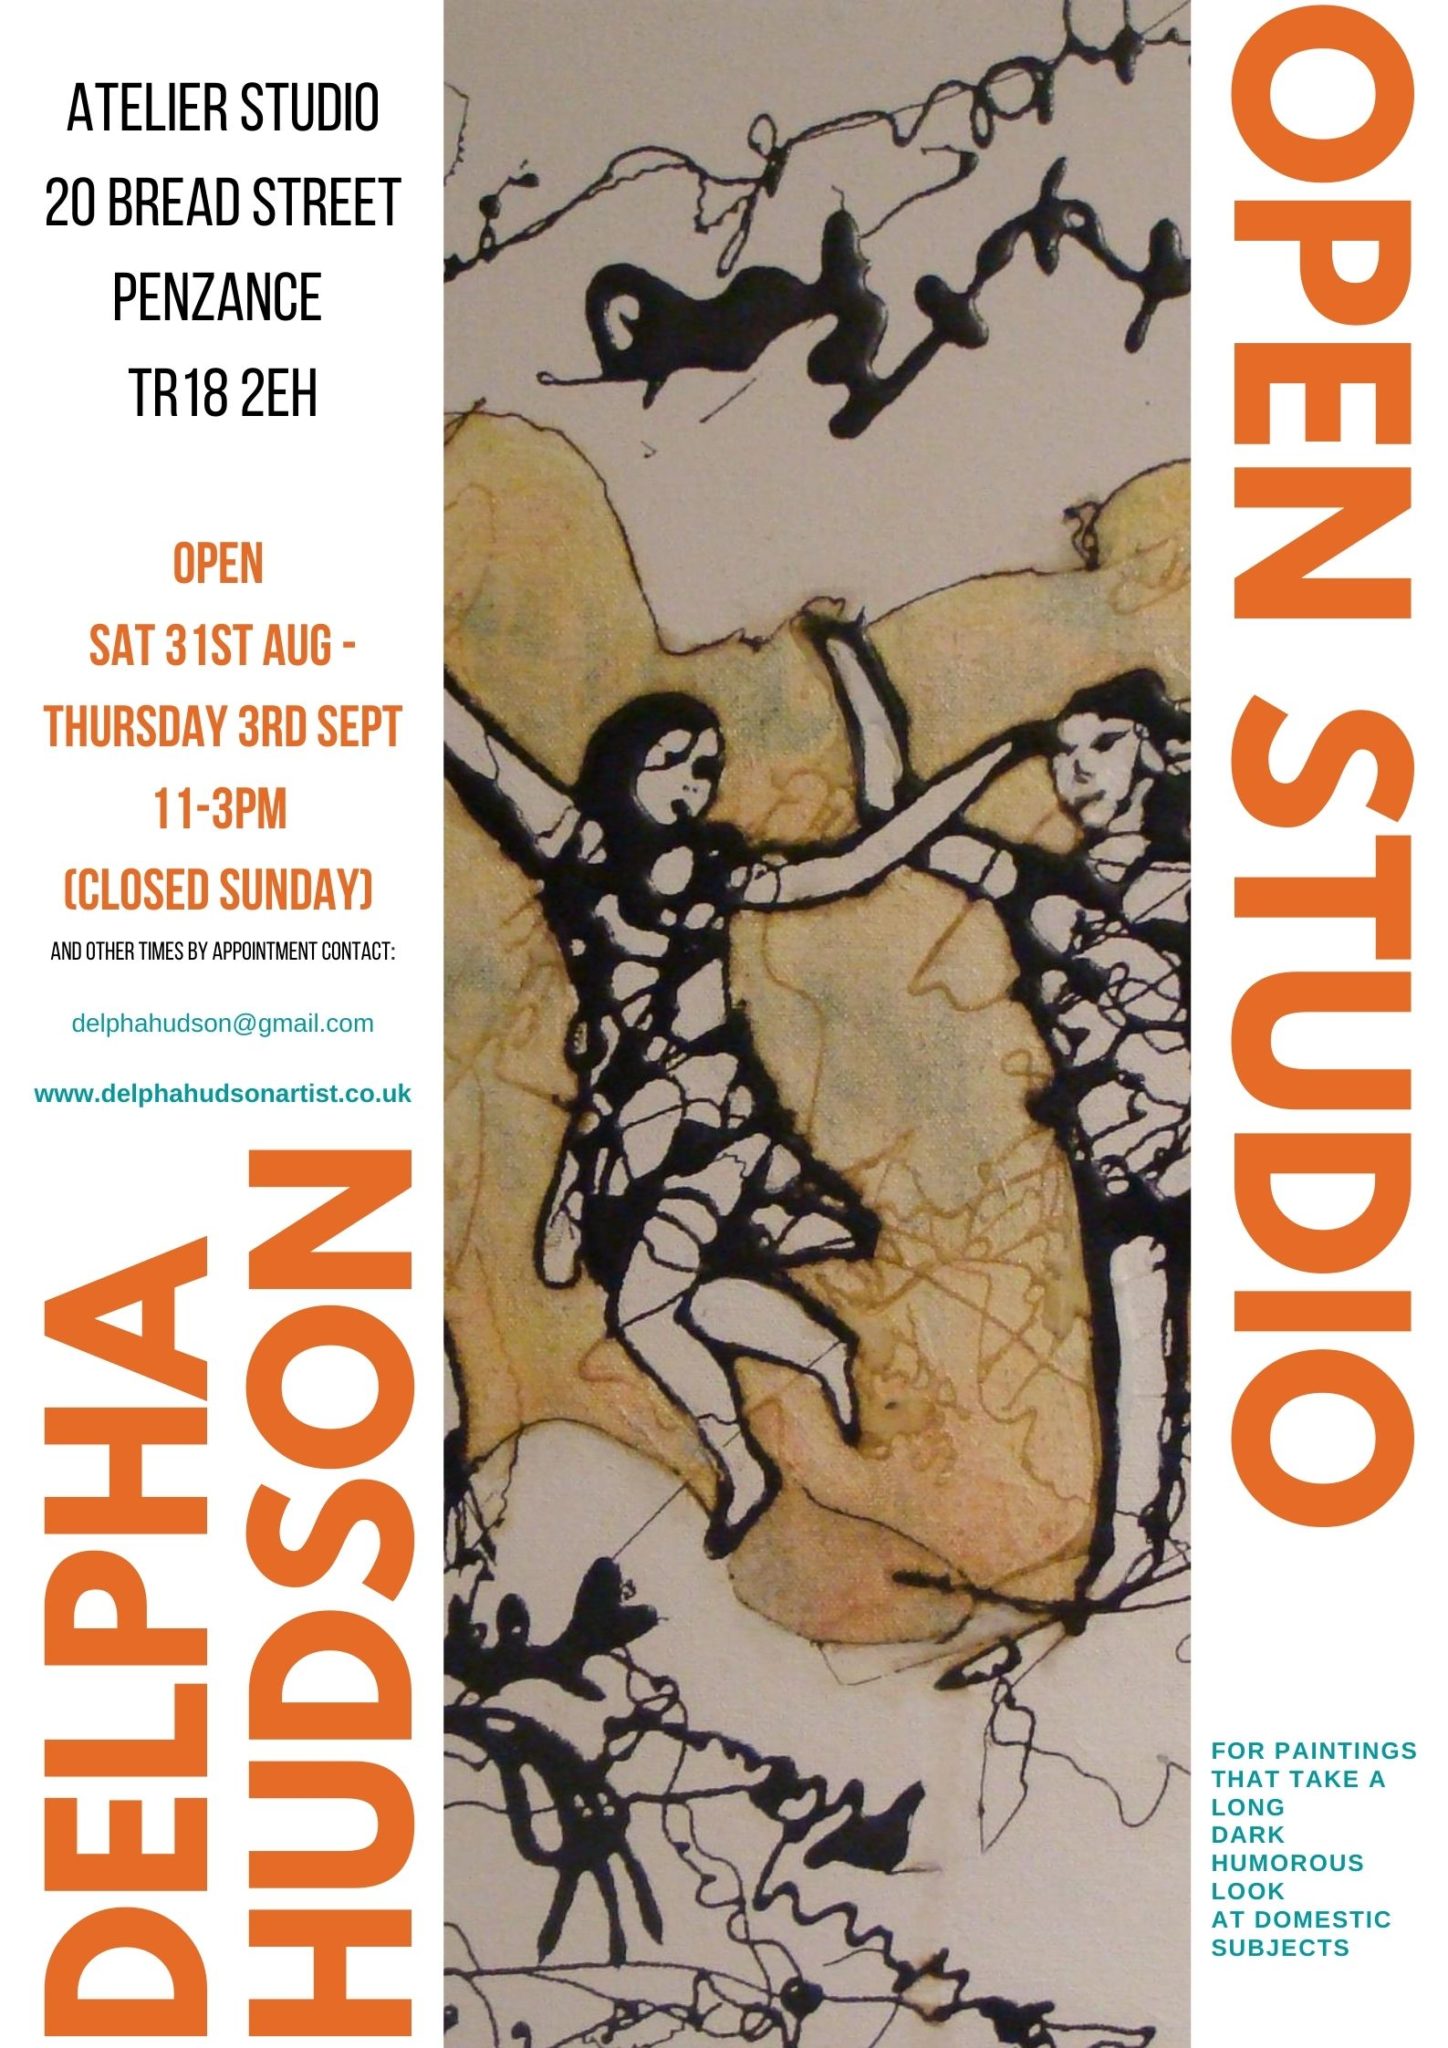 poster that advertises open studio, bright colours and painting of people dancing